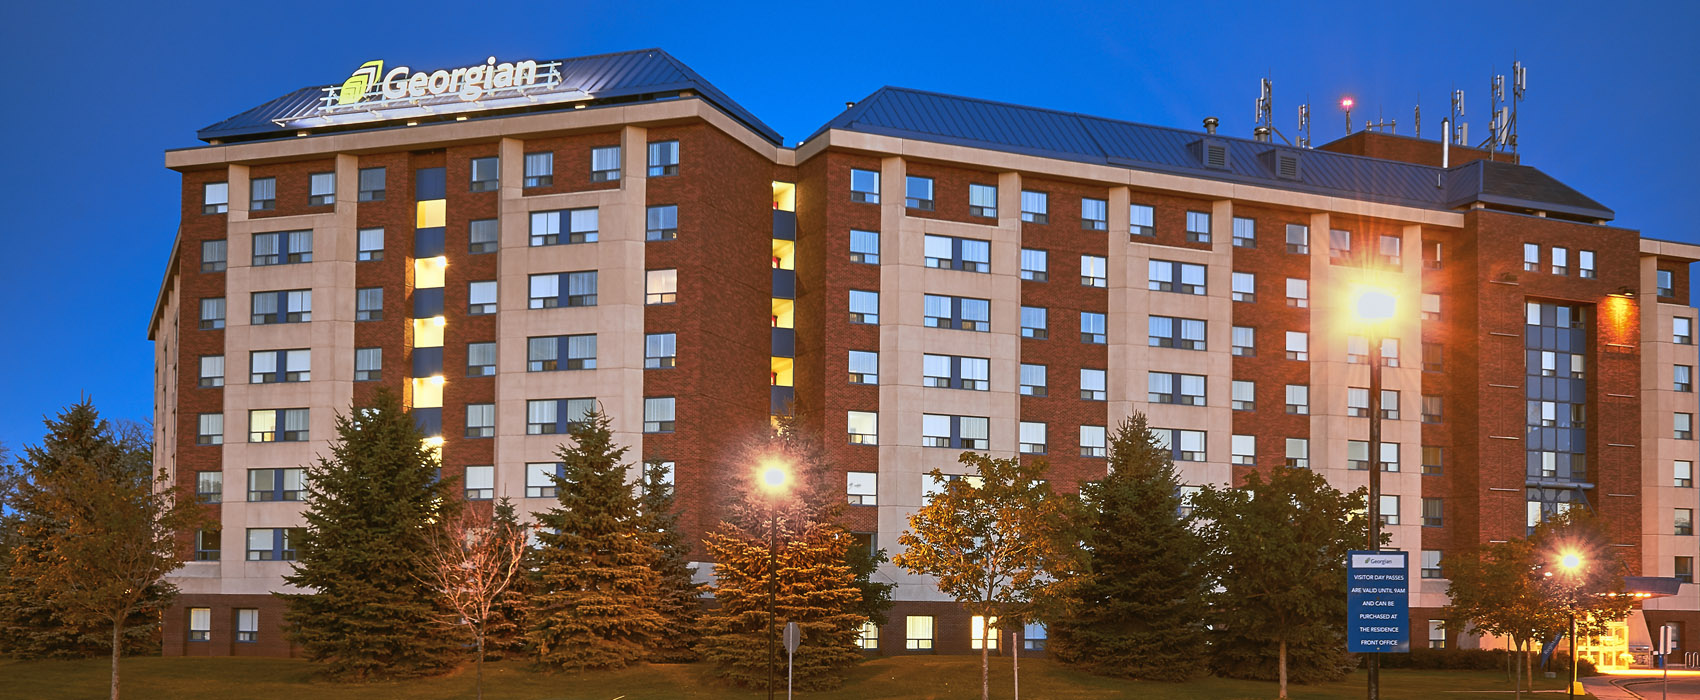 A photo taken at night of the front of the Georgian College Barrie campus residence